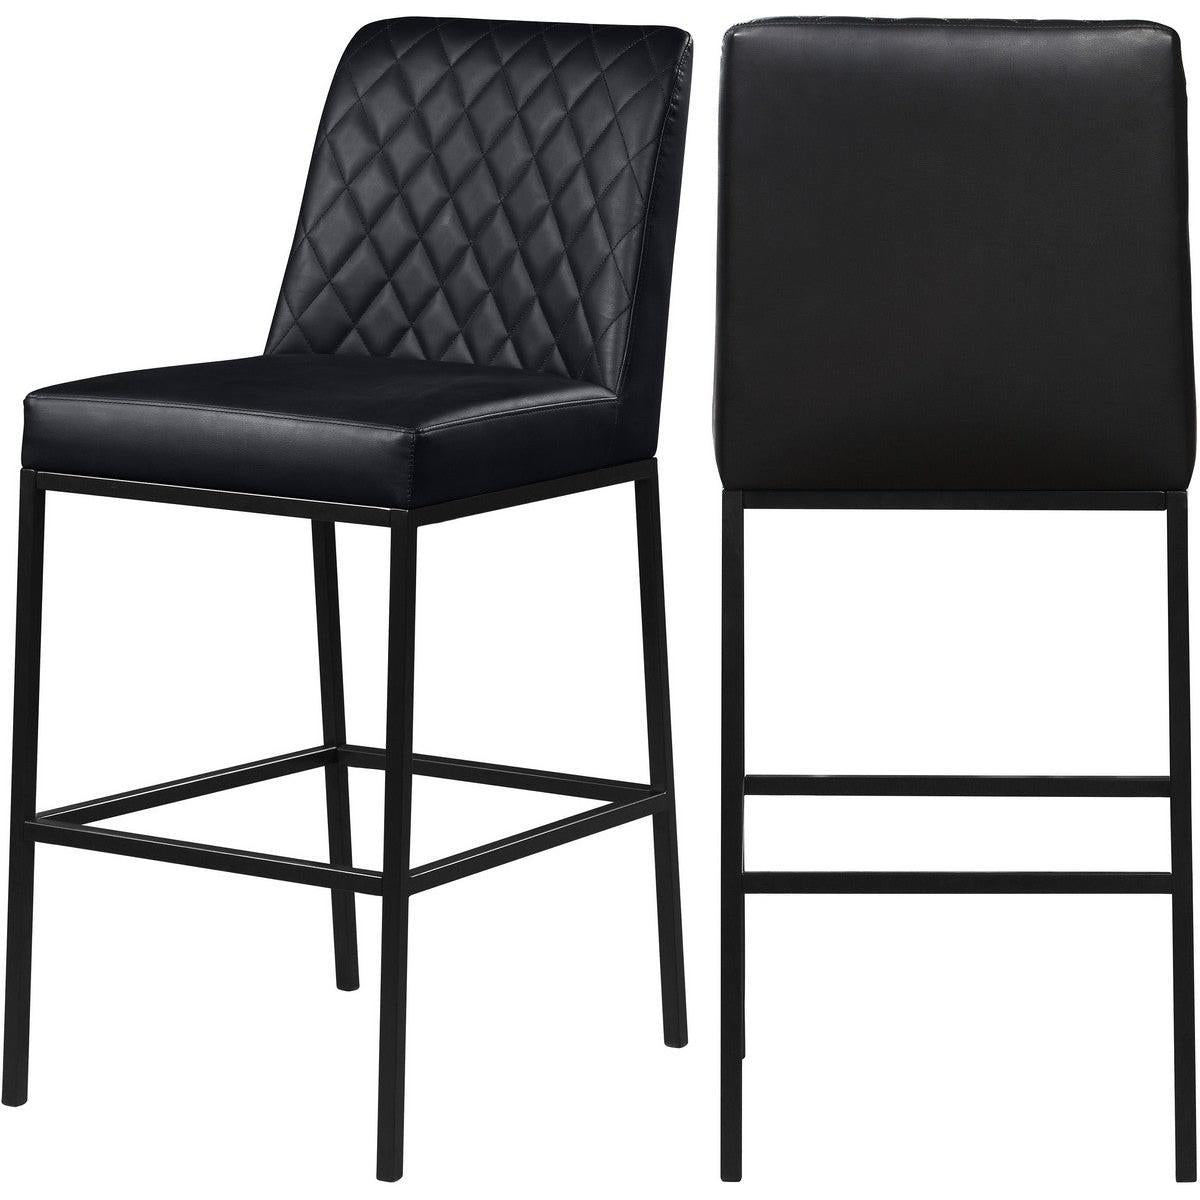 Meridian Furniture Bryce Black Faux Leather StoolMeridian Furniture - Stool - Minimal And Modern - 1